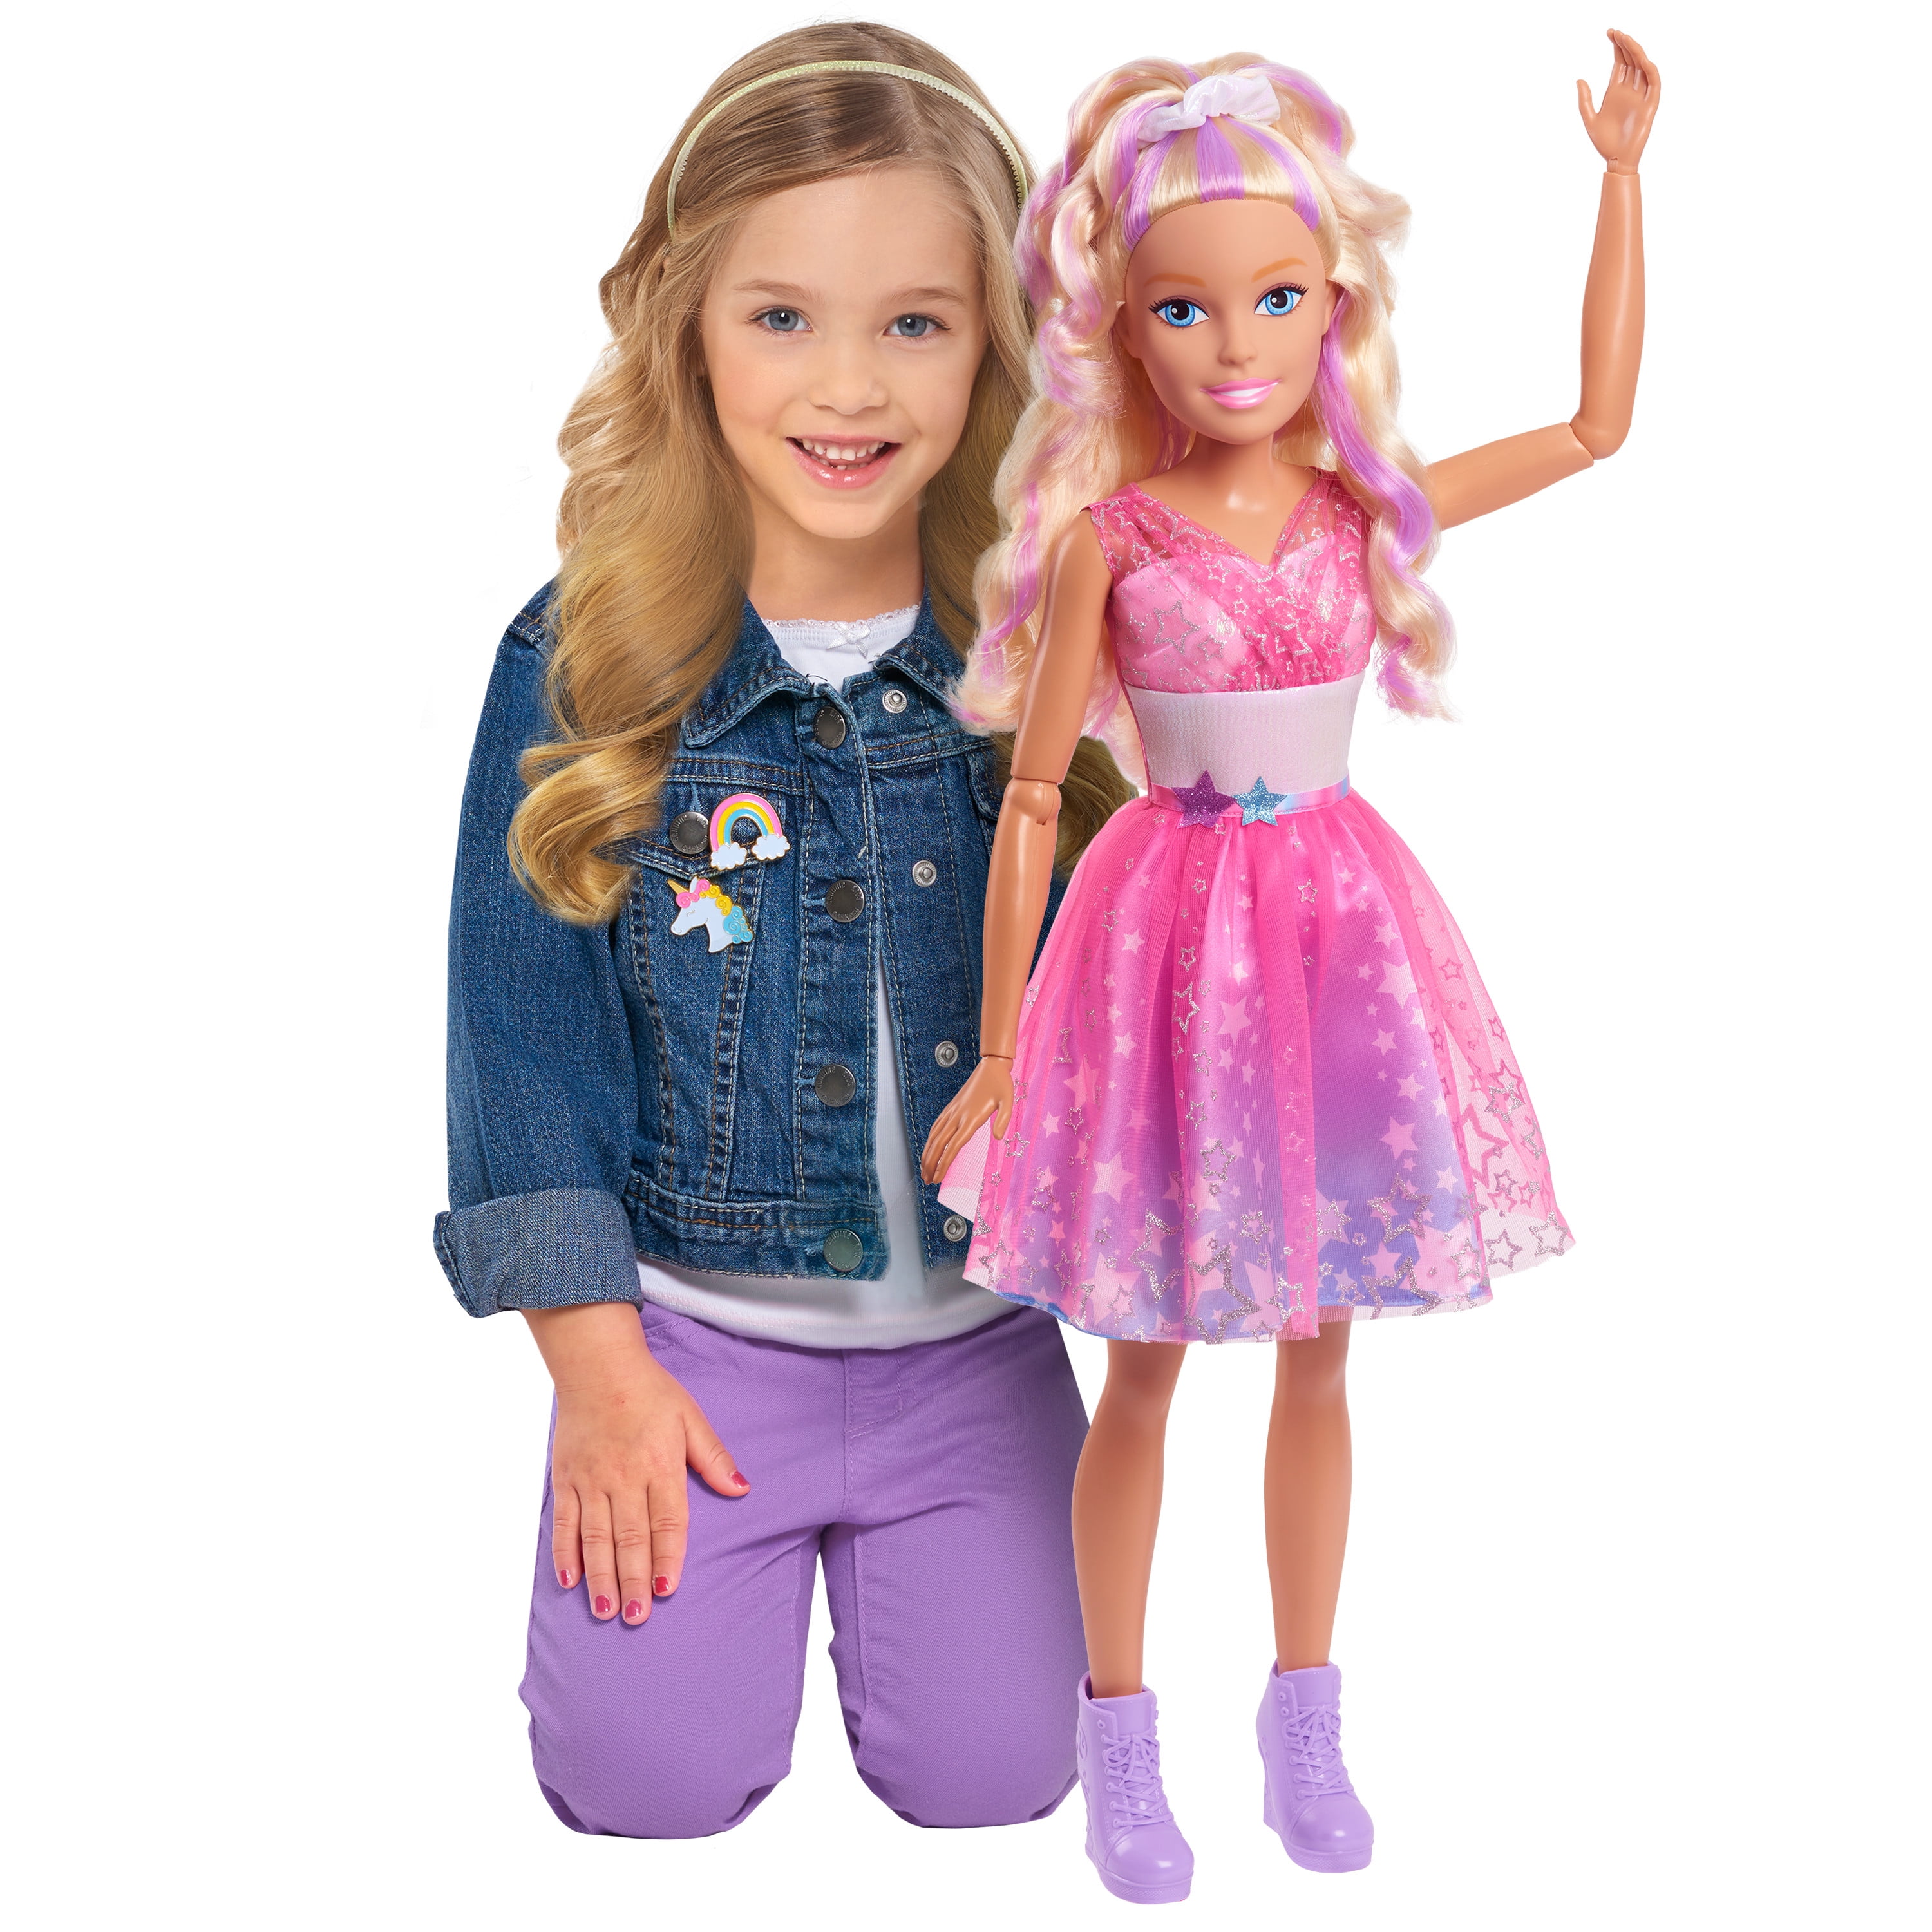 en gang sortere reparatøren Barbie 28-Inch Best Fashion Friend Star Power Doll, Blonde Hair, Kids Toys  for Ages 3 Up, Gifts and Presents - Walmart.com